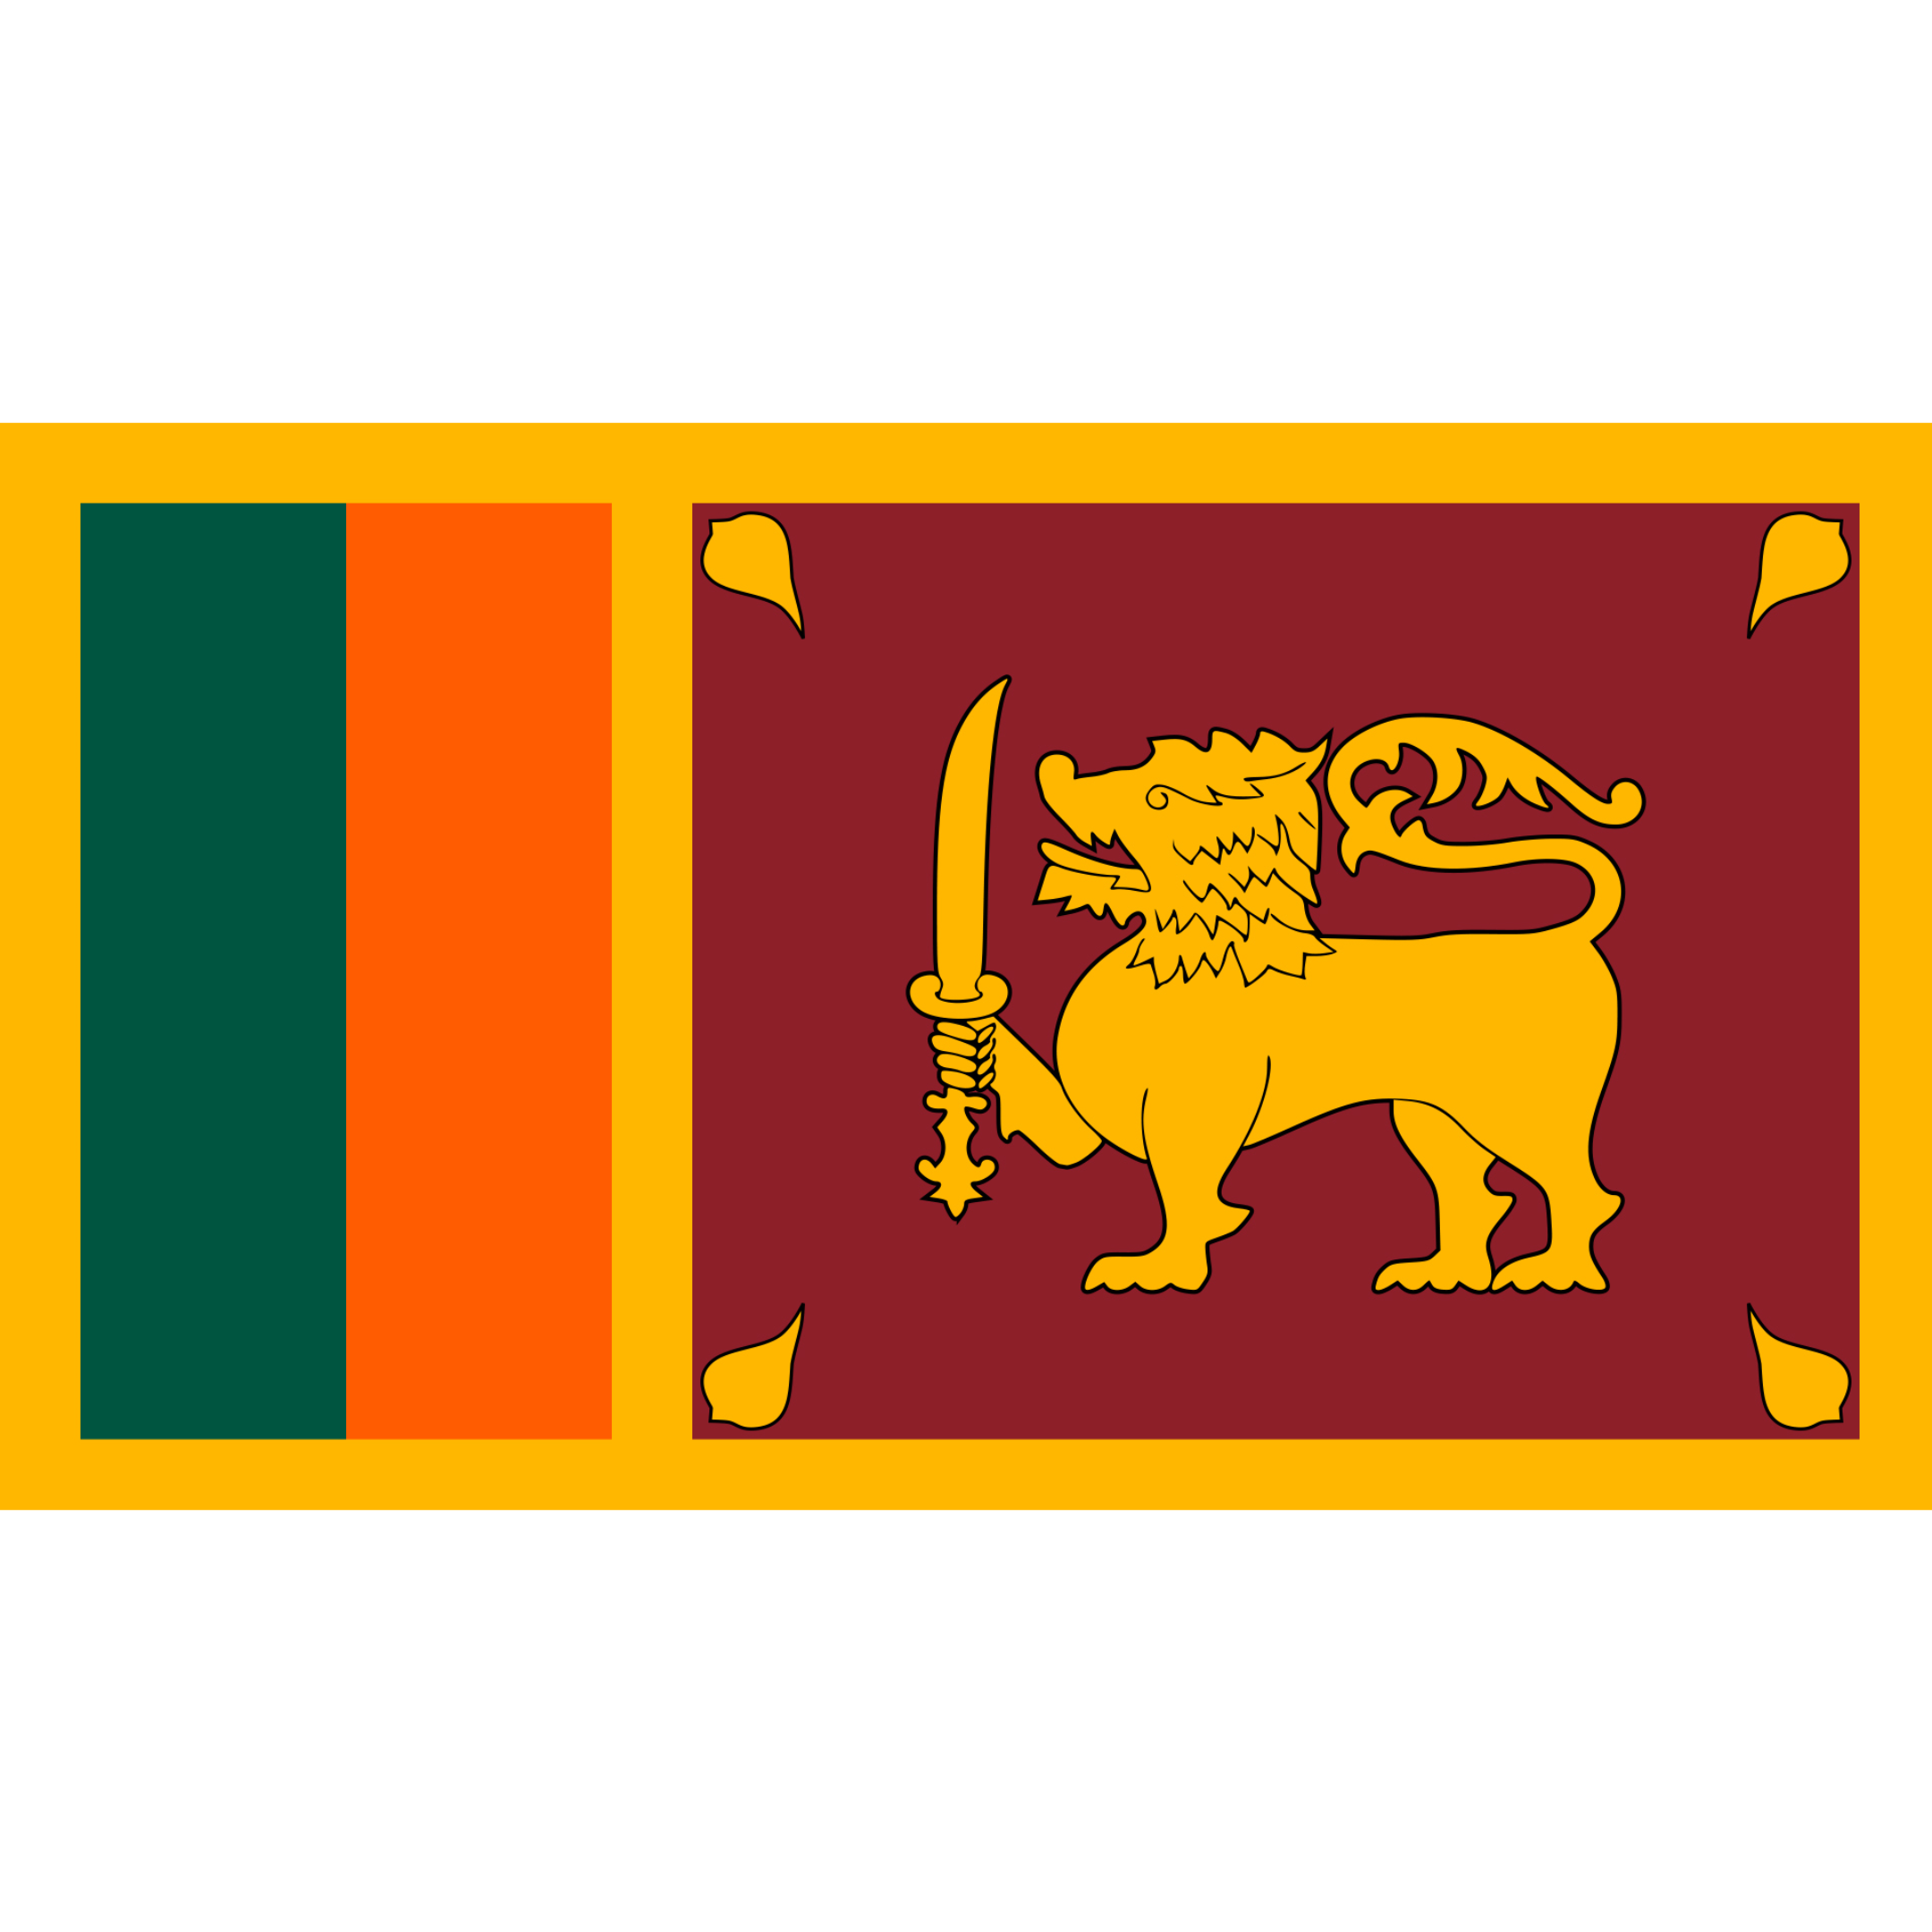 Sri Lanka's flag is a red rectangle with a gold border, 2 green & orange vertical stripes on the left & a lion on the right.